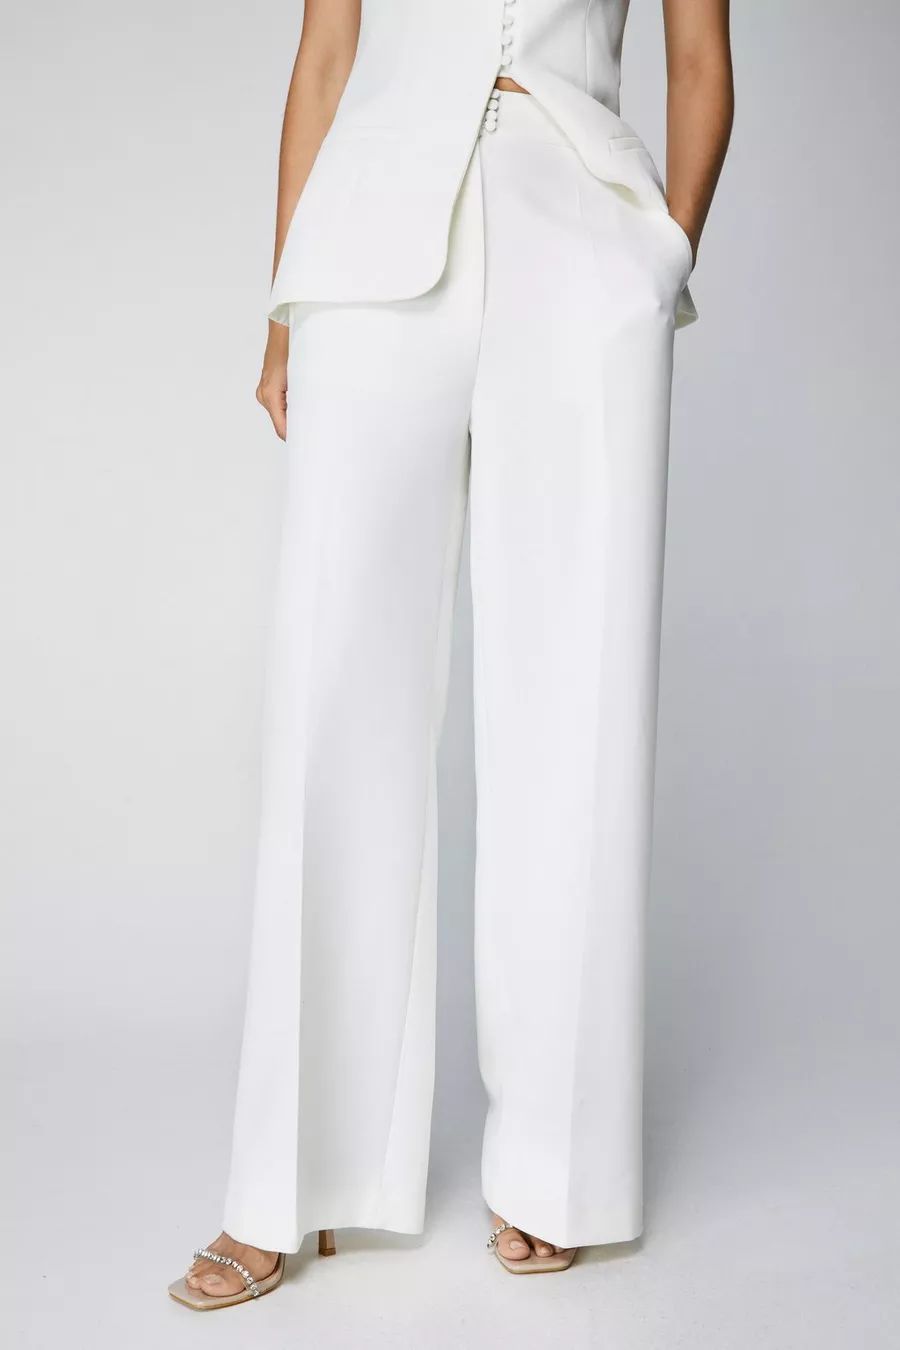 Premium Tailored Rouleau Button Detail Pants | Nasty Gal US